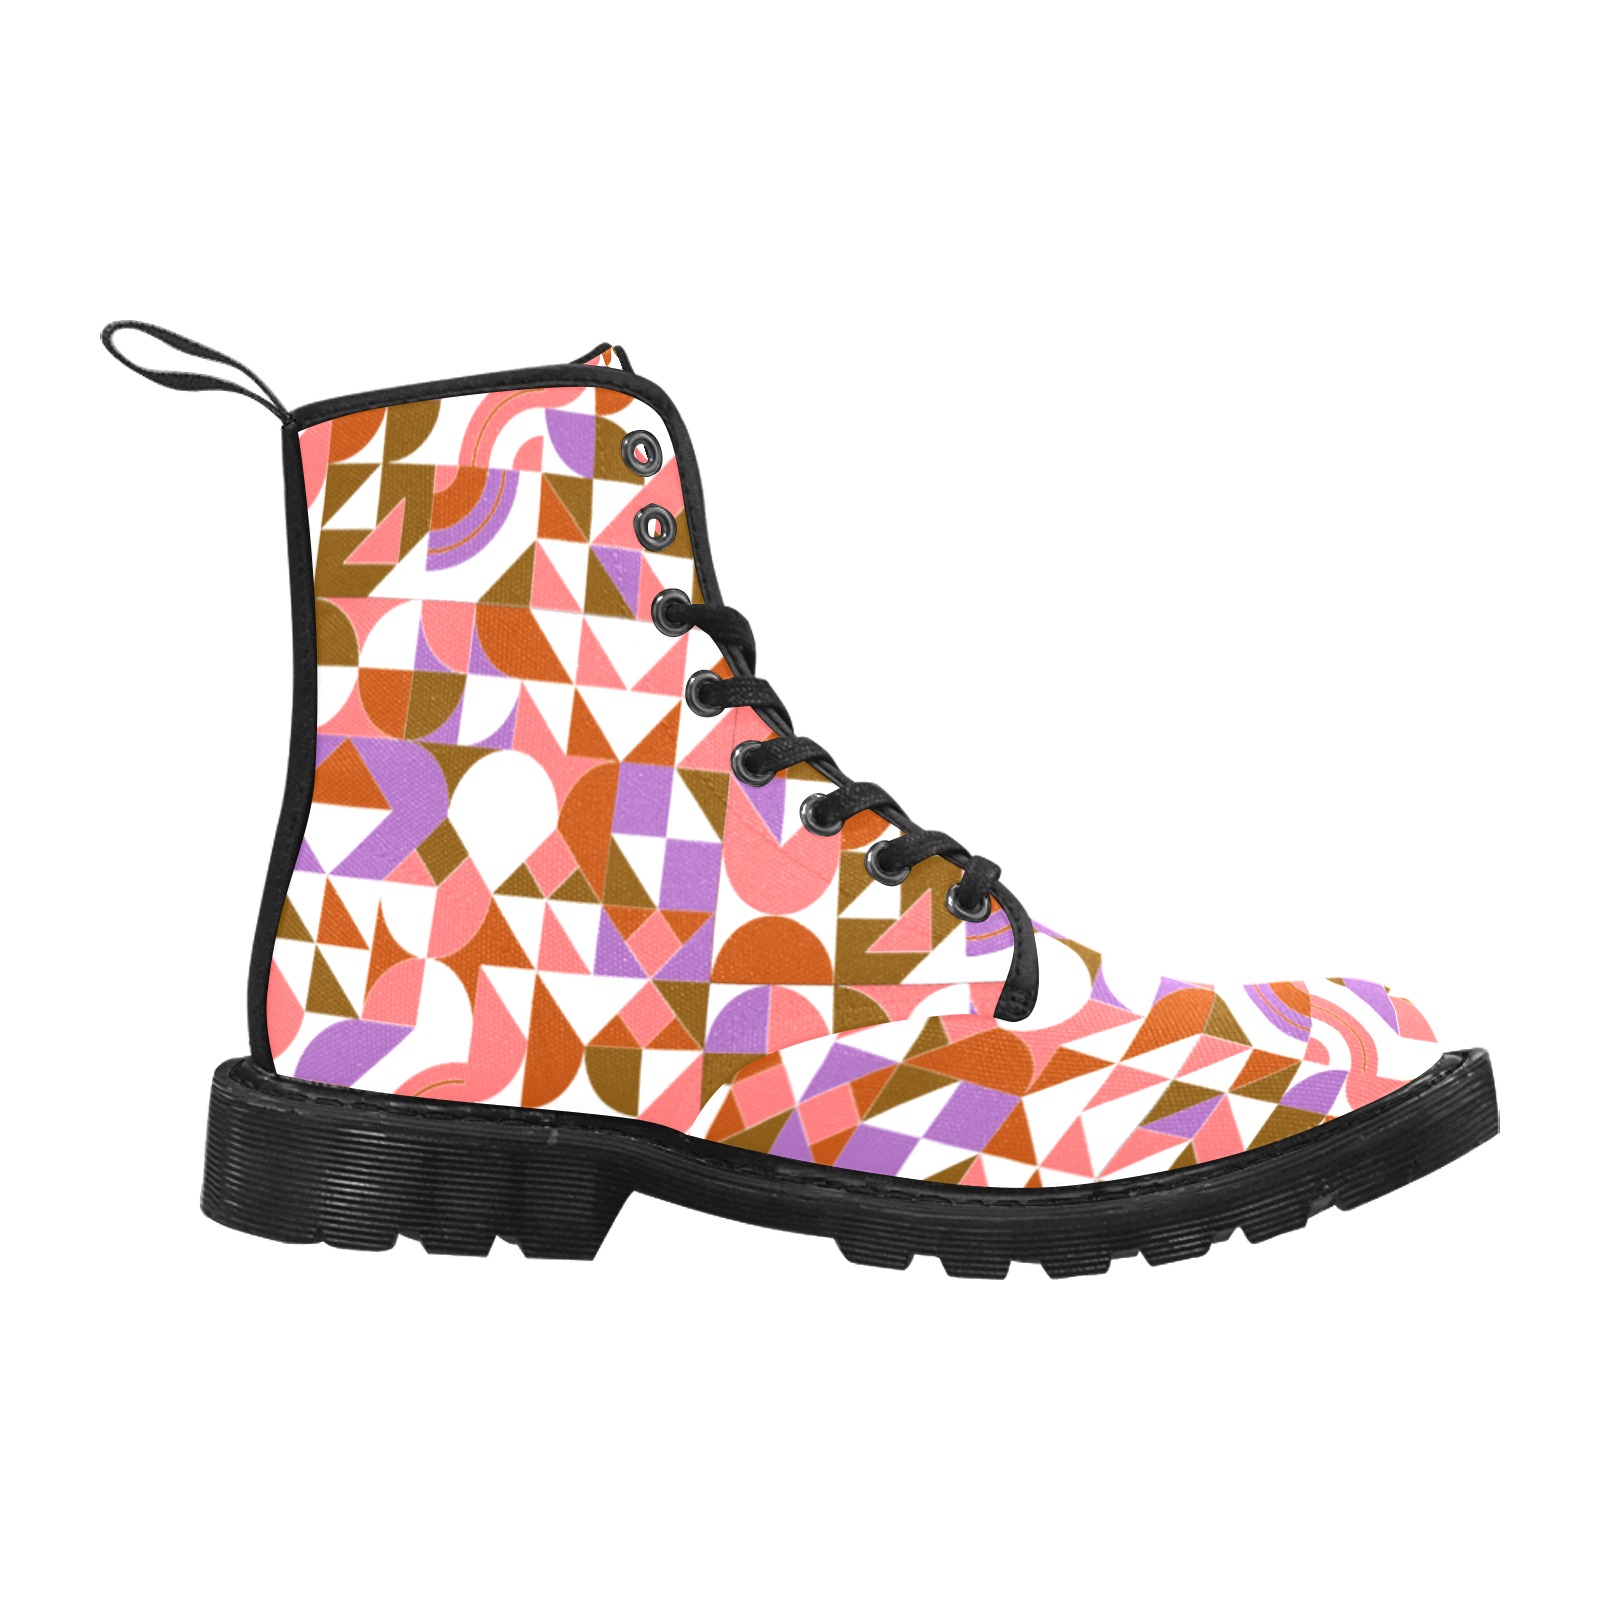 geomattric colorful patterns conceptual Art - Abstract Neo Geo graphic design (142) Martin Boots for Women (Black) (Model 1203H)